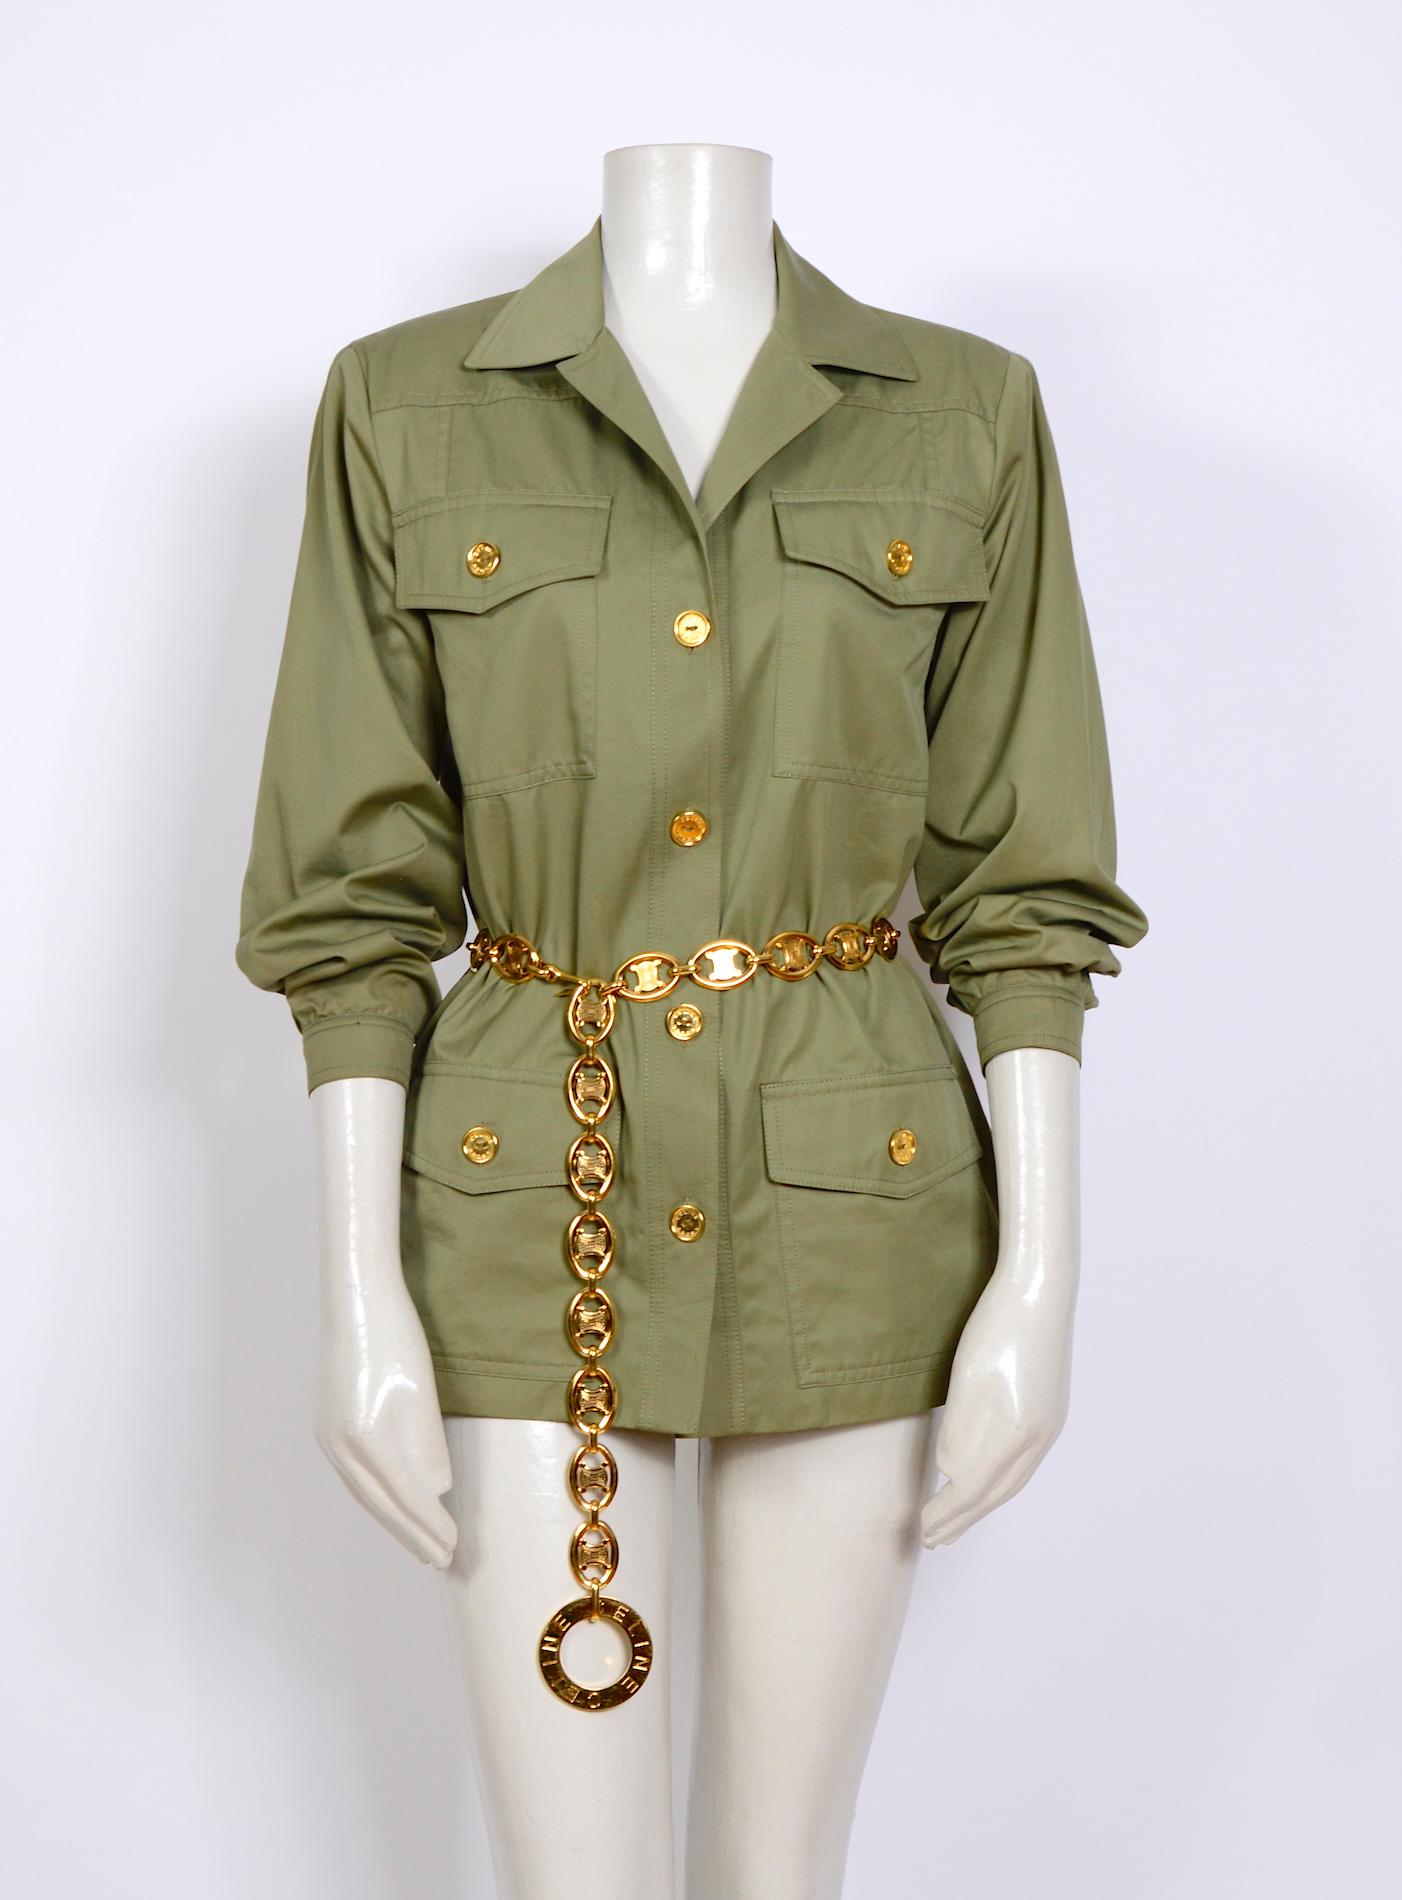 1970s cotton khaki safari jacket & jupe culotte suit by Celine.
Excellent condition. 
The belt is not included but is available on 1stdibs.
Please consult the measurements for the perfect fit.
Measurements are taken flat:
Jacket: Sh to SH